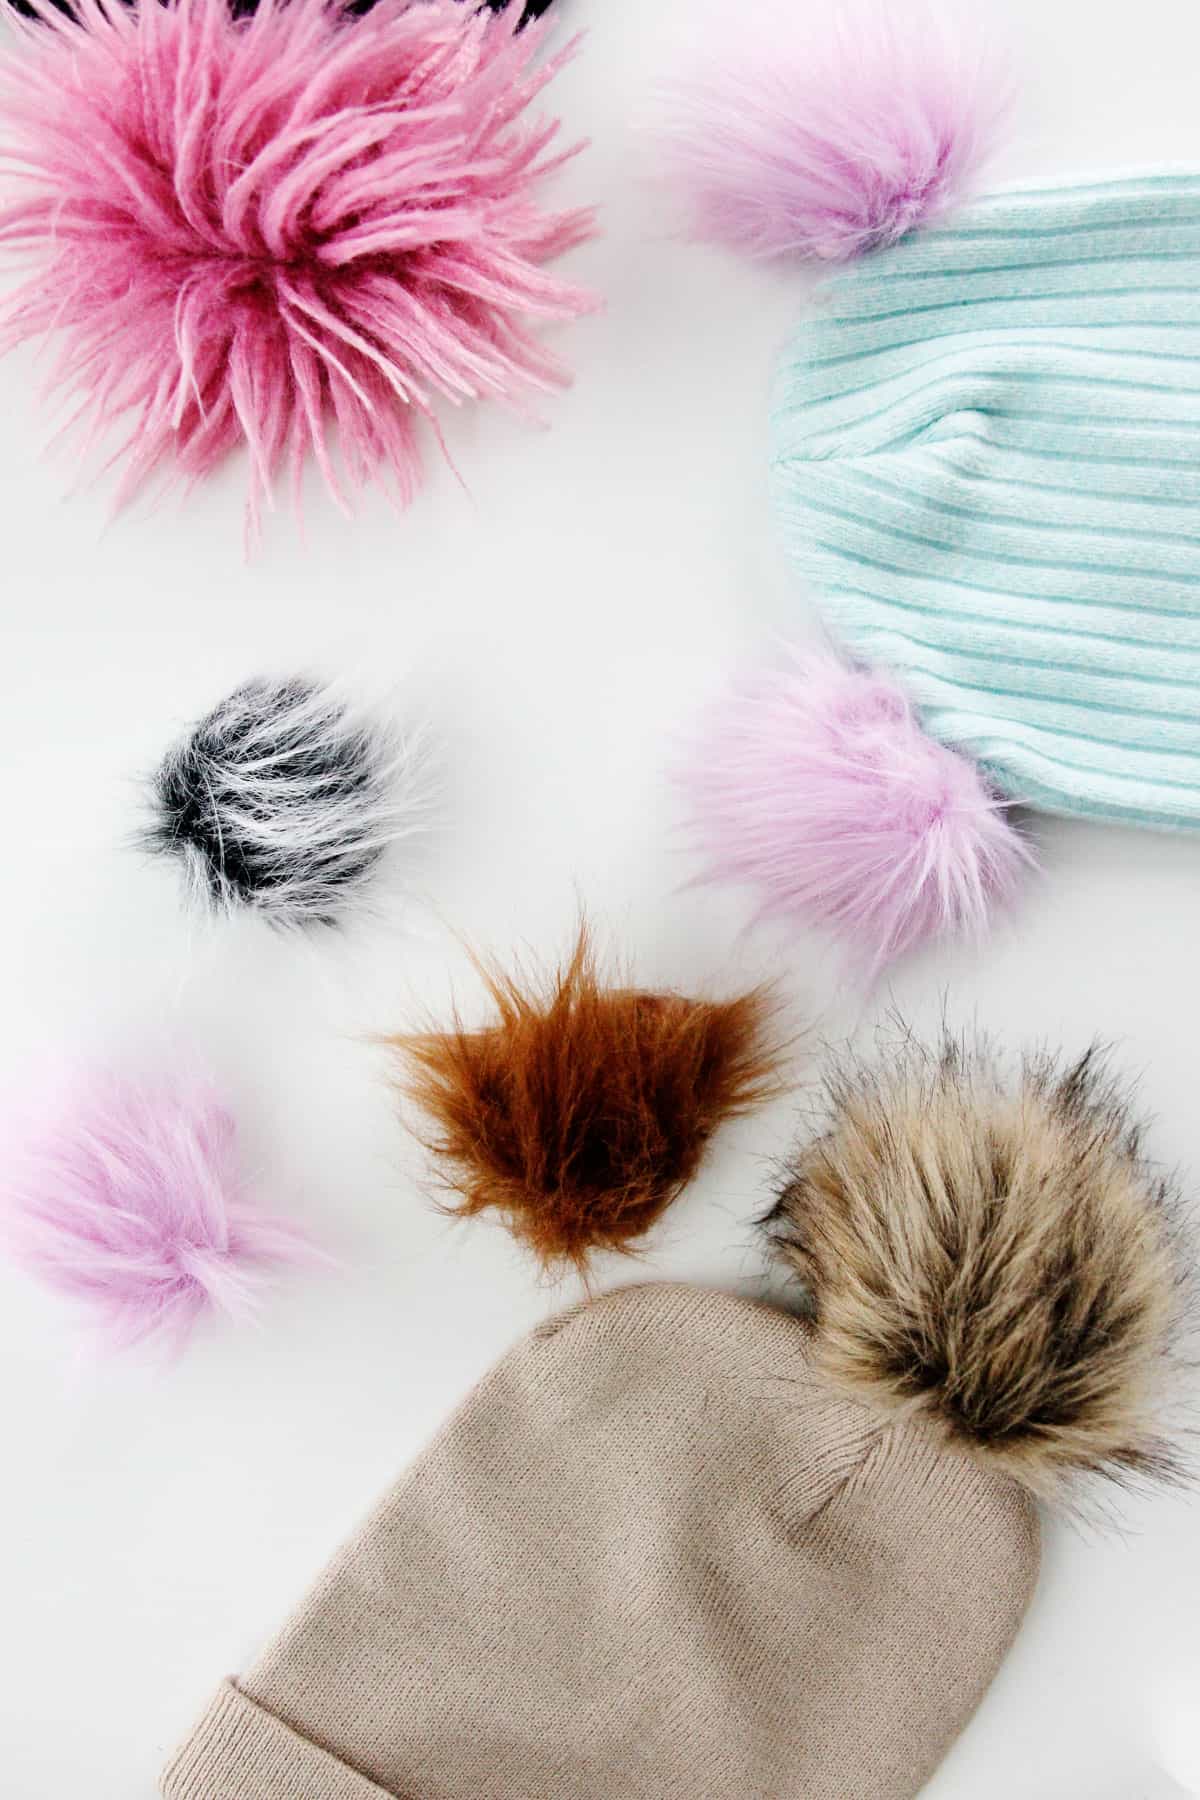 How To Make a Pom Pom For a Hat (or Anything Else!)